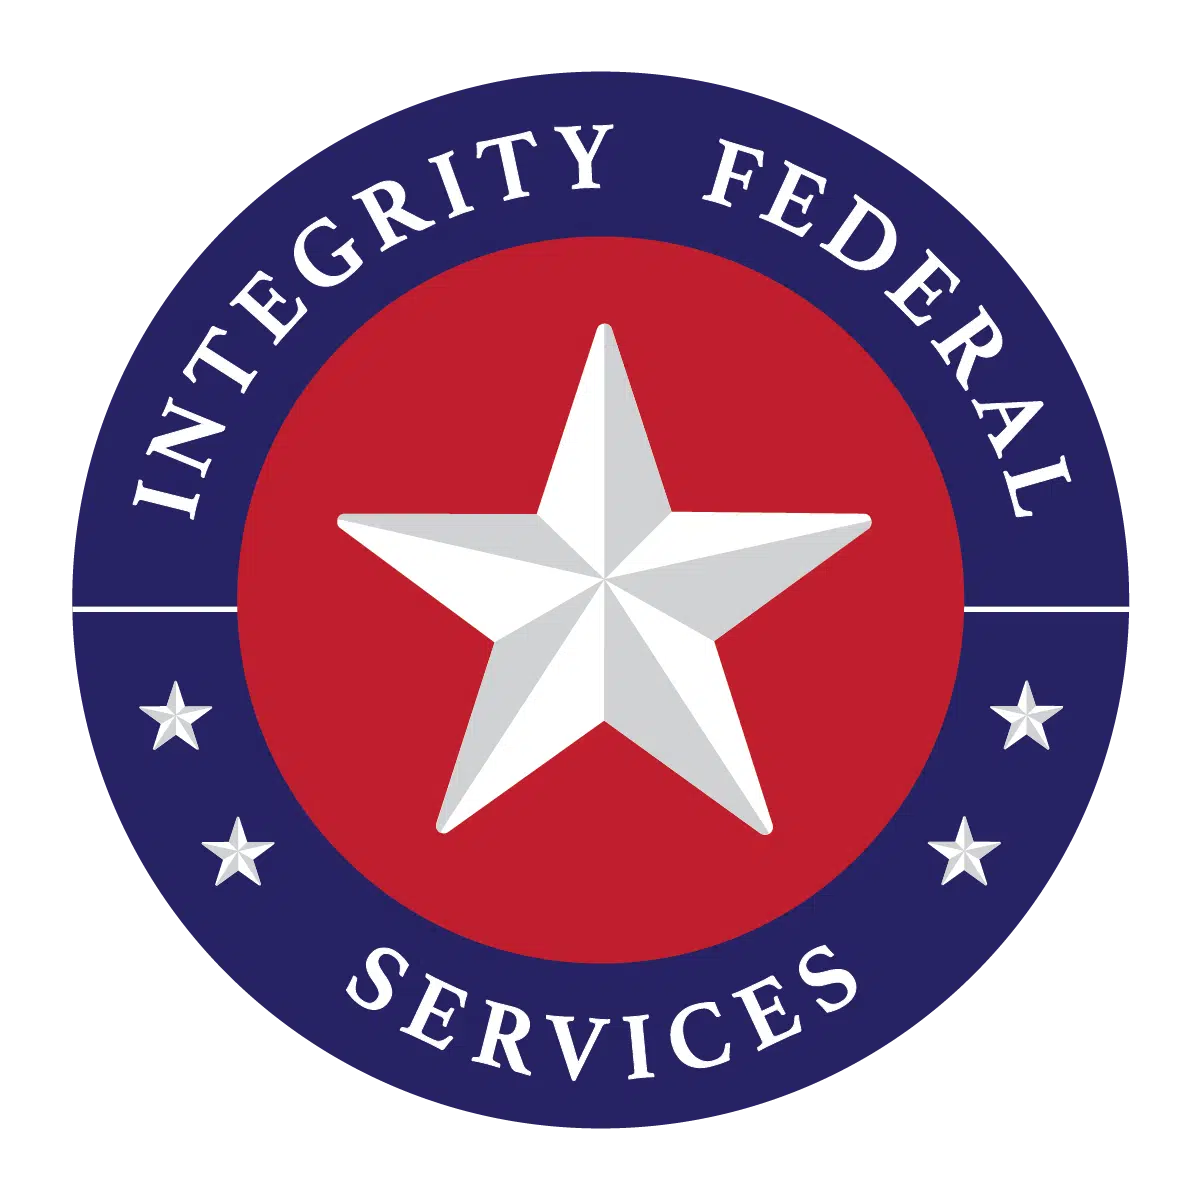 This Integrity Federal Services logo is a circle with a blue border and the words "Integrity Federal Services" around the outside edge. The middle of the logo contains a smaller red circle with a white star.